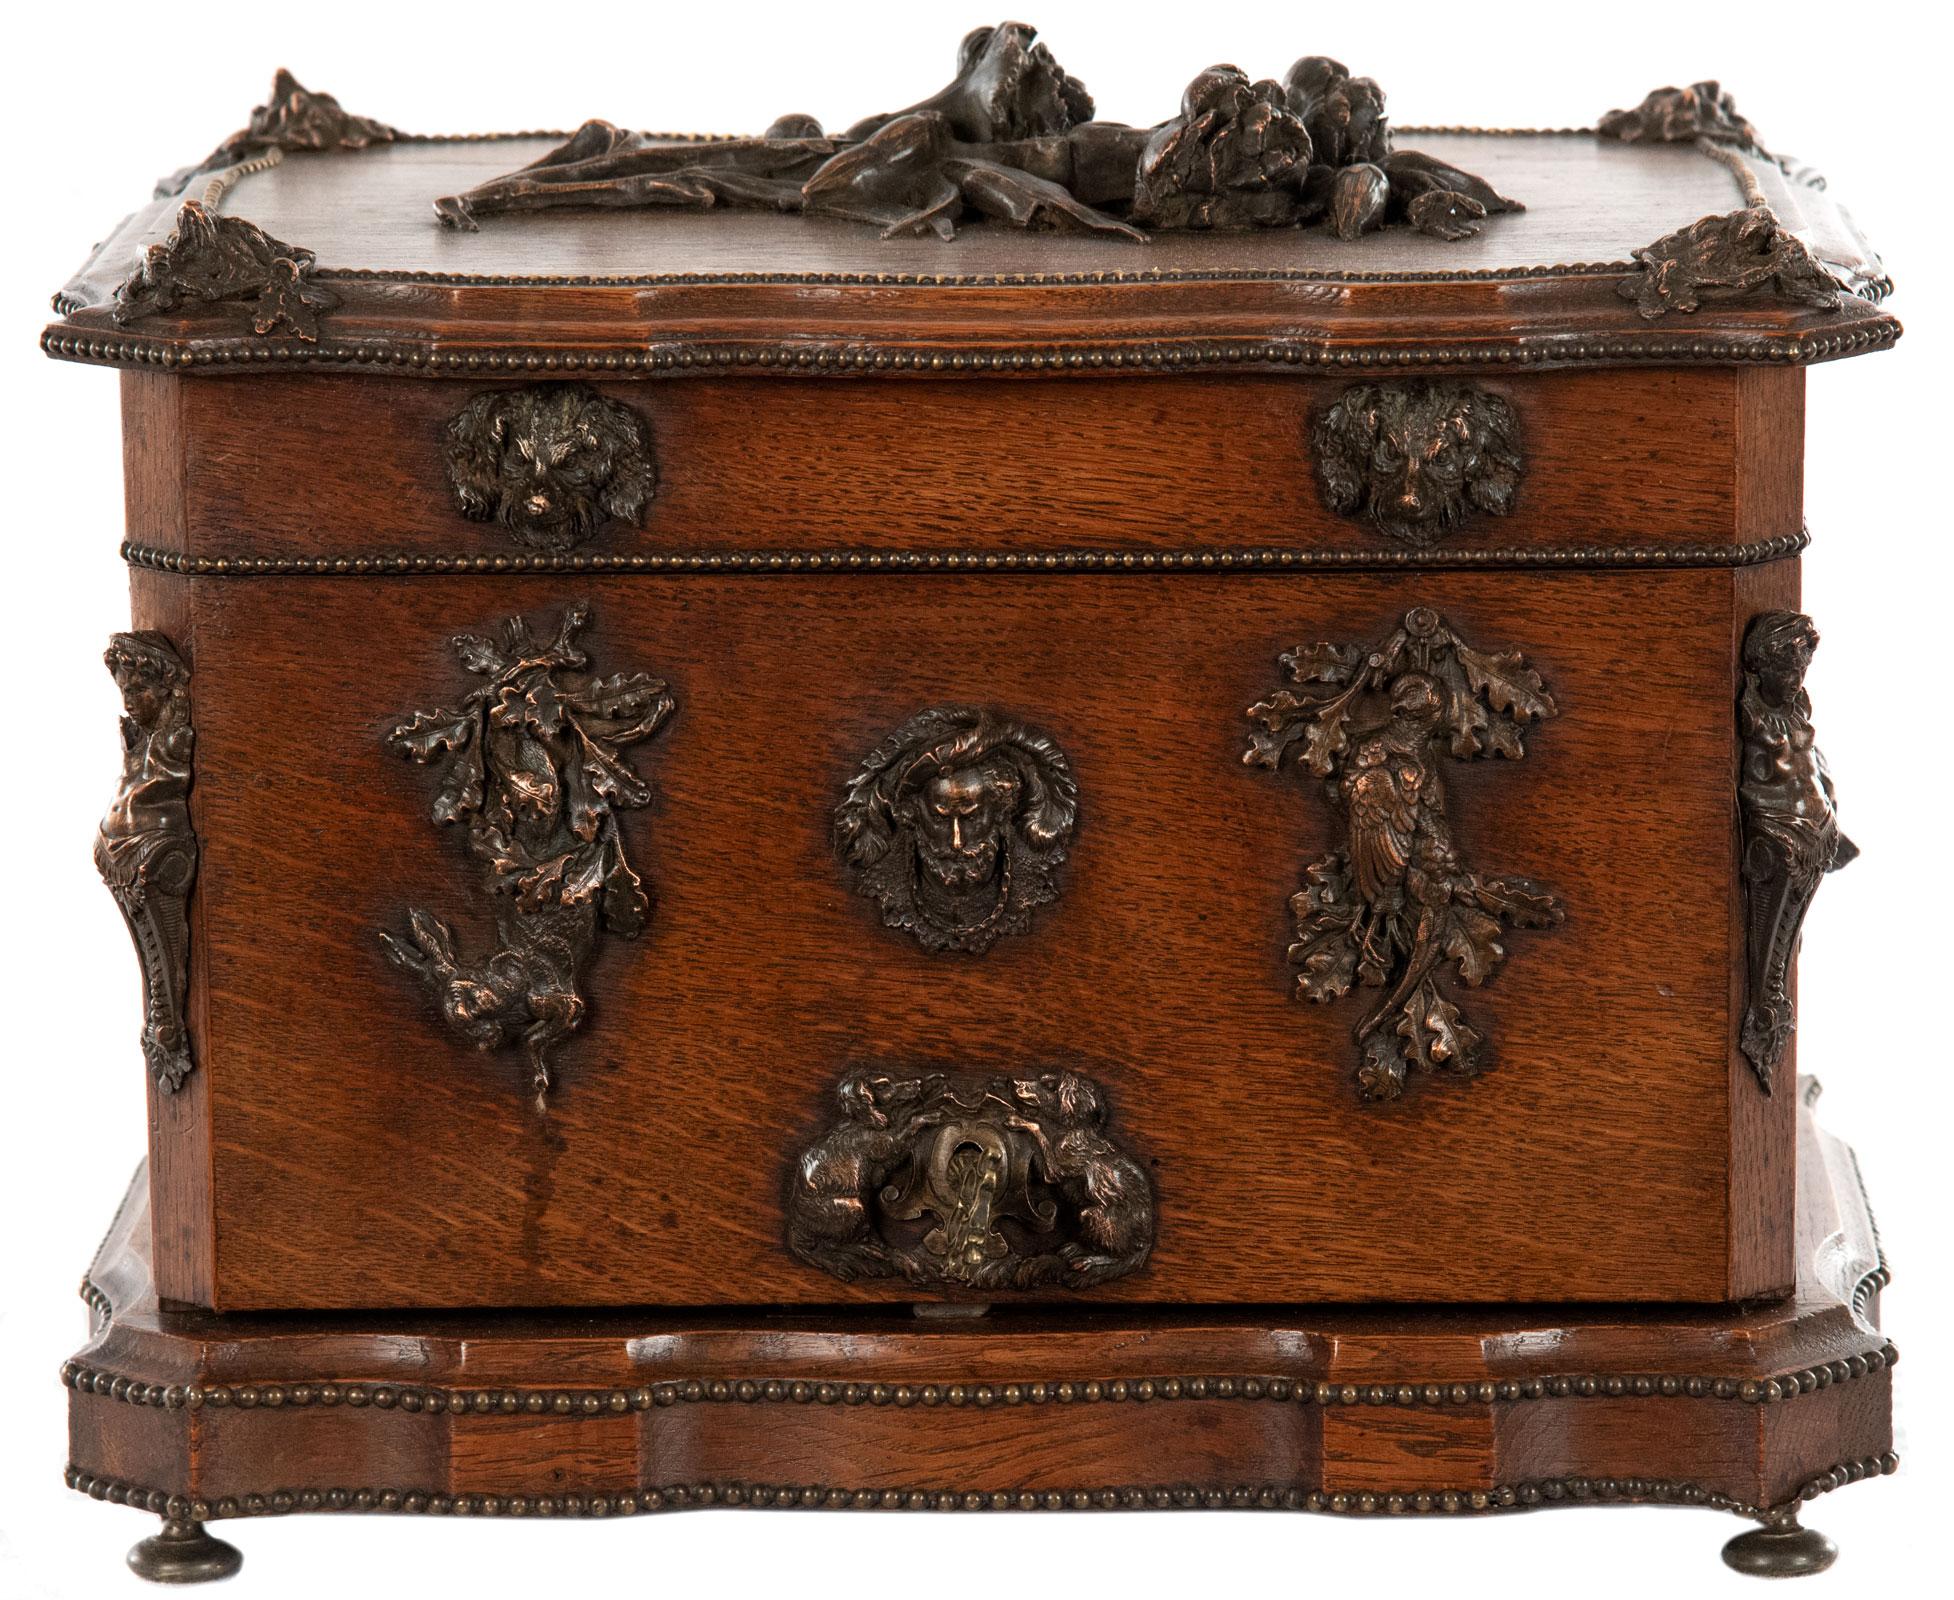 A mid-19th century French oak box tantalus with a locking, self-folding front and folding sides that open to reveal an interior fitted with a gilt bronze and oak caddy that holds sixteen crystal pieces of stemware and four decanters with stops. The